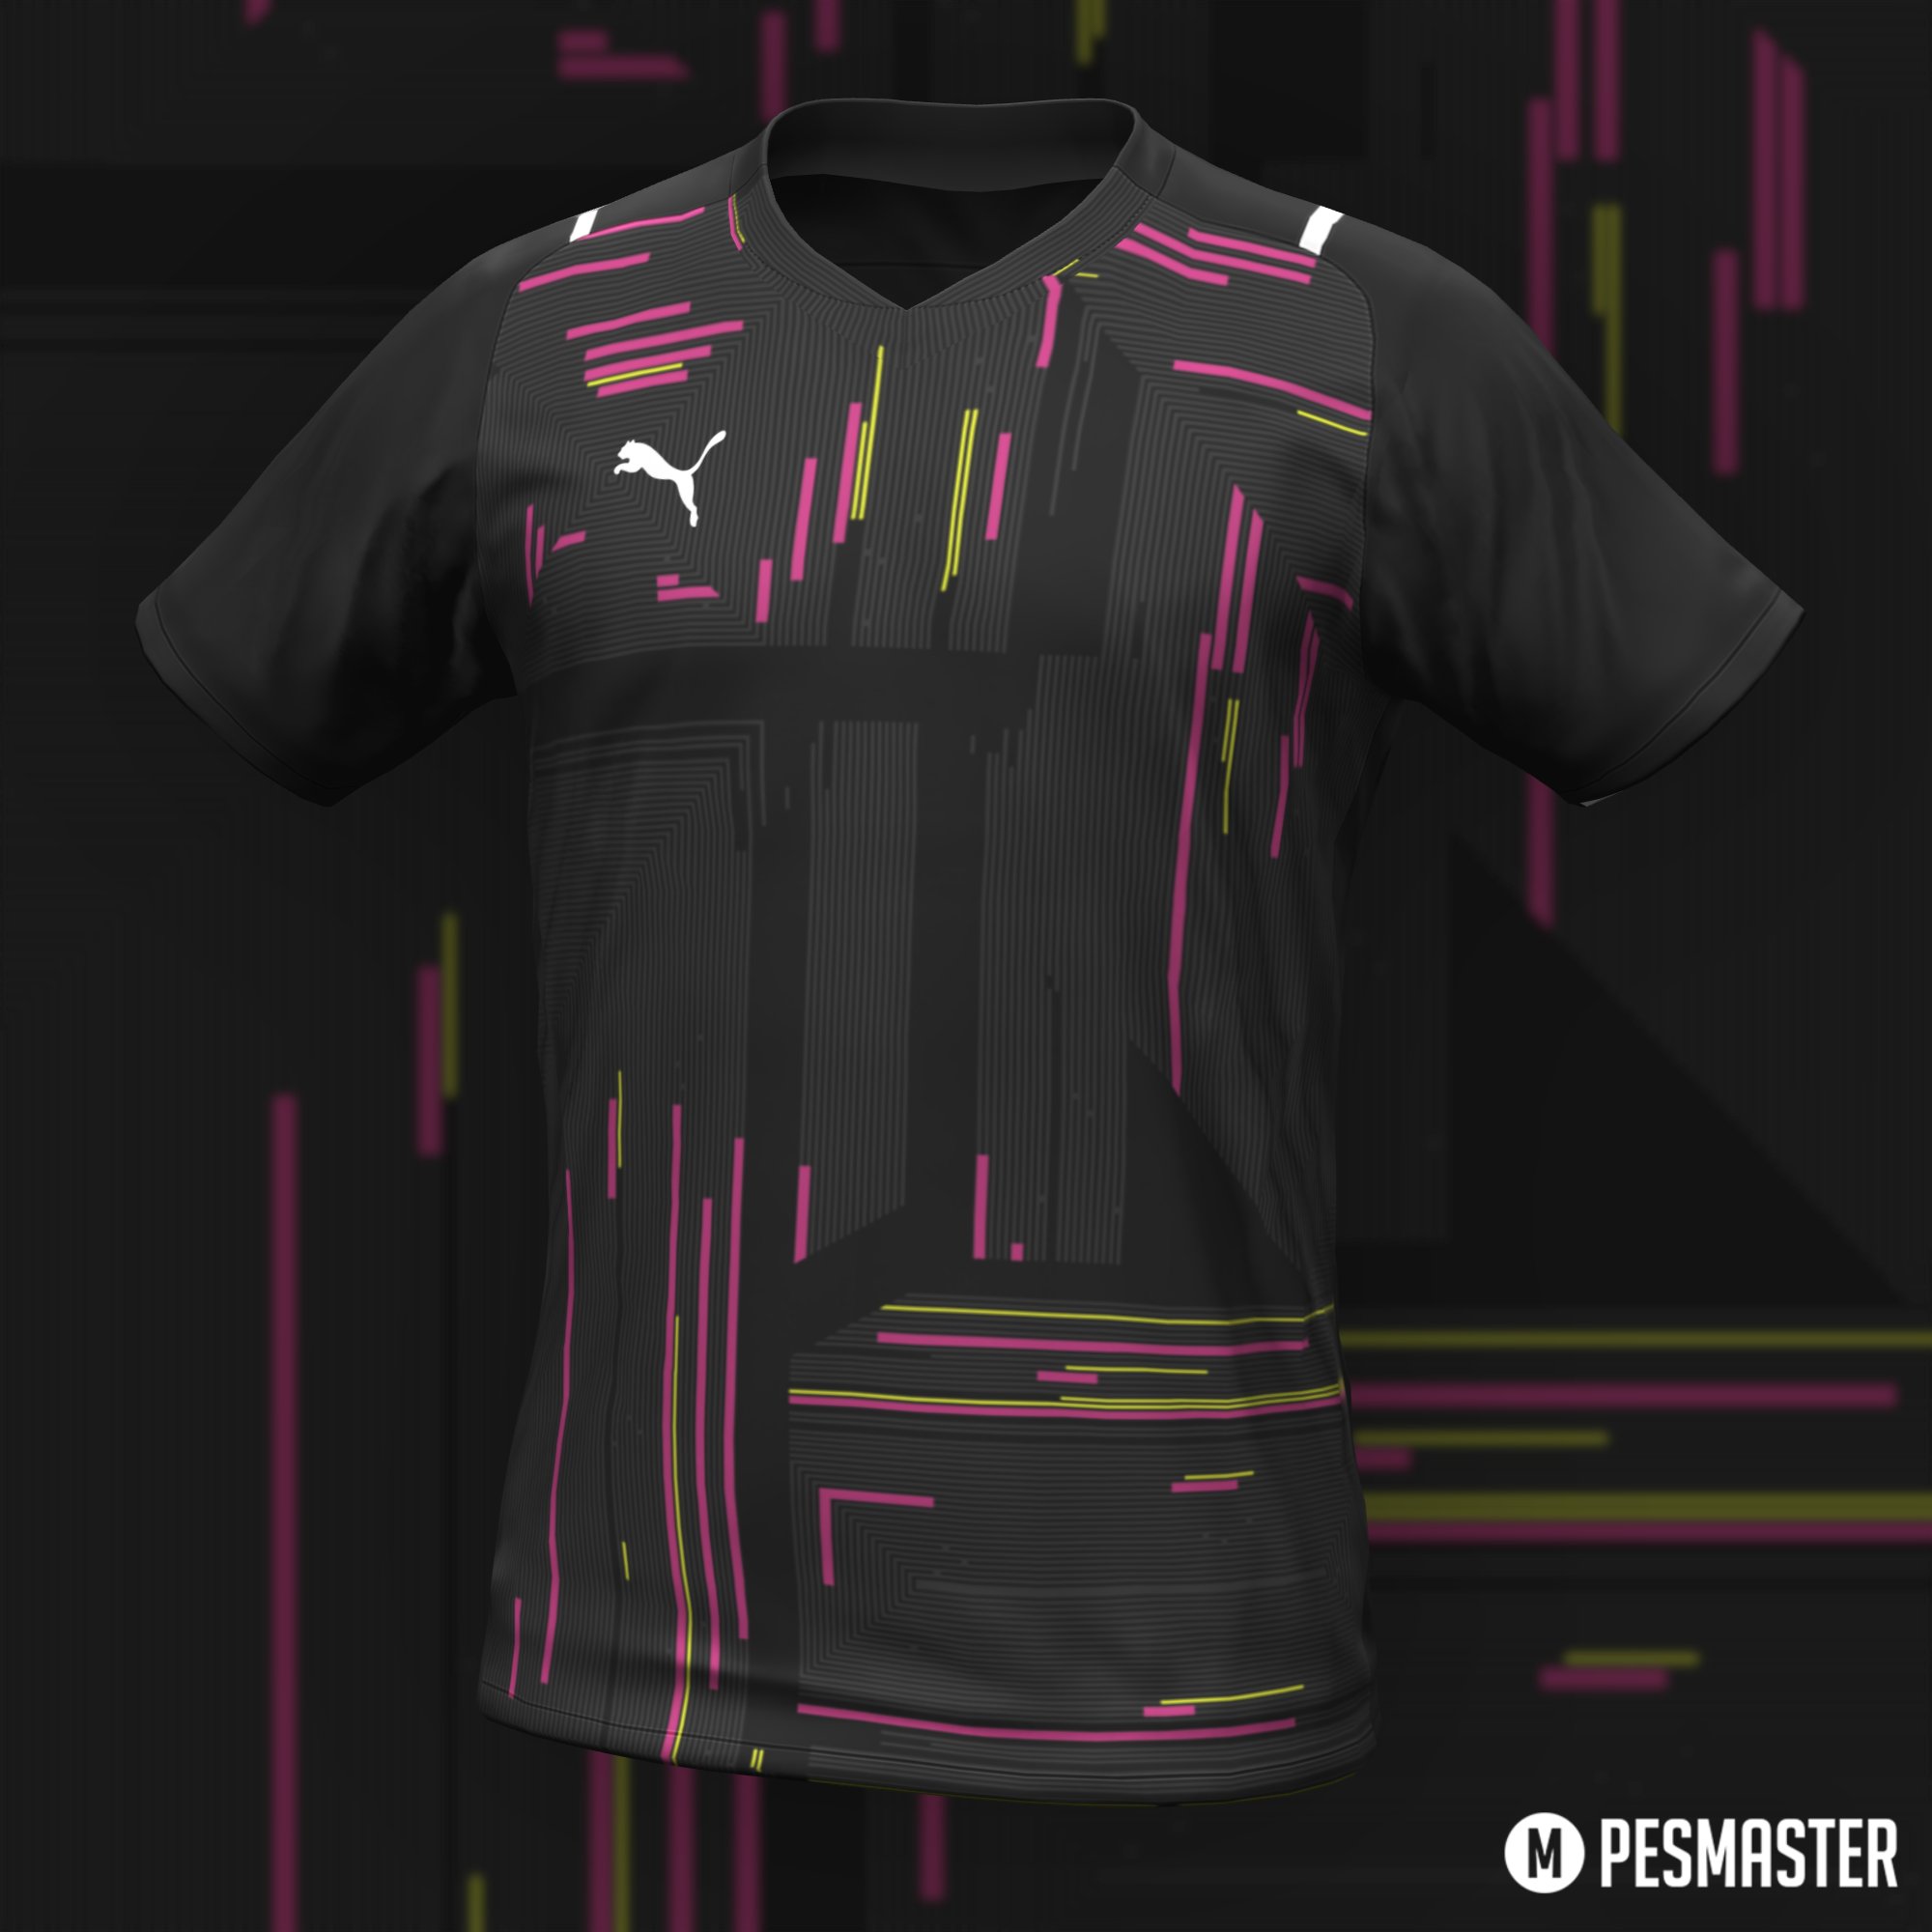 ganancia semilla idioma PES Master on Twitter: "🧤 Puma 21-22 Goalkeeper template, dropping on  September 17th (already in early access). Pattern by @DesignsCorinth 🔥  https://t.co/VNlaPb4B7L" / Twitter